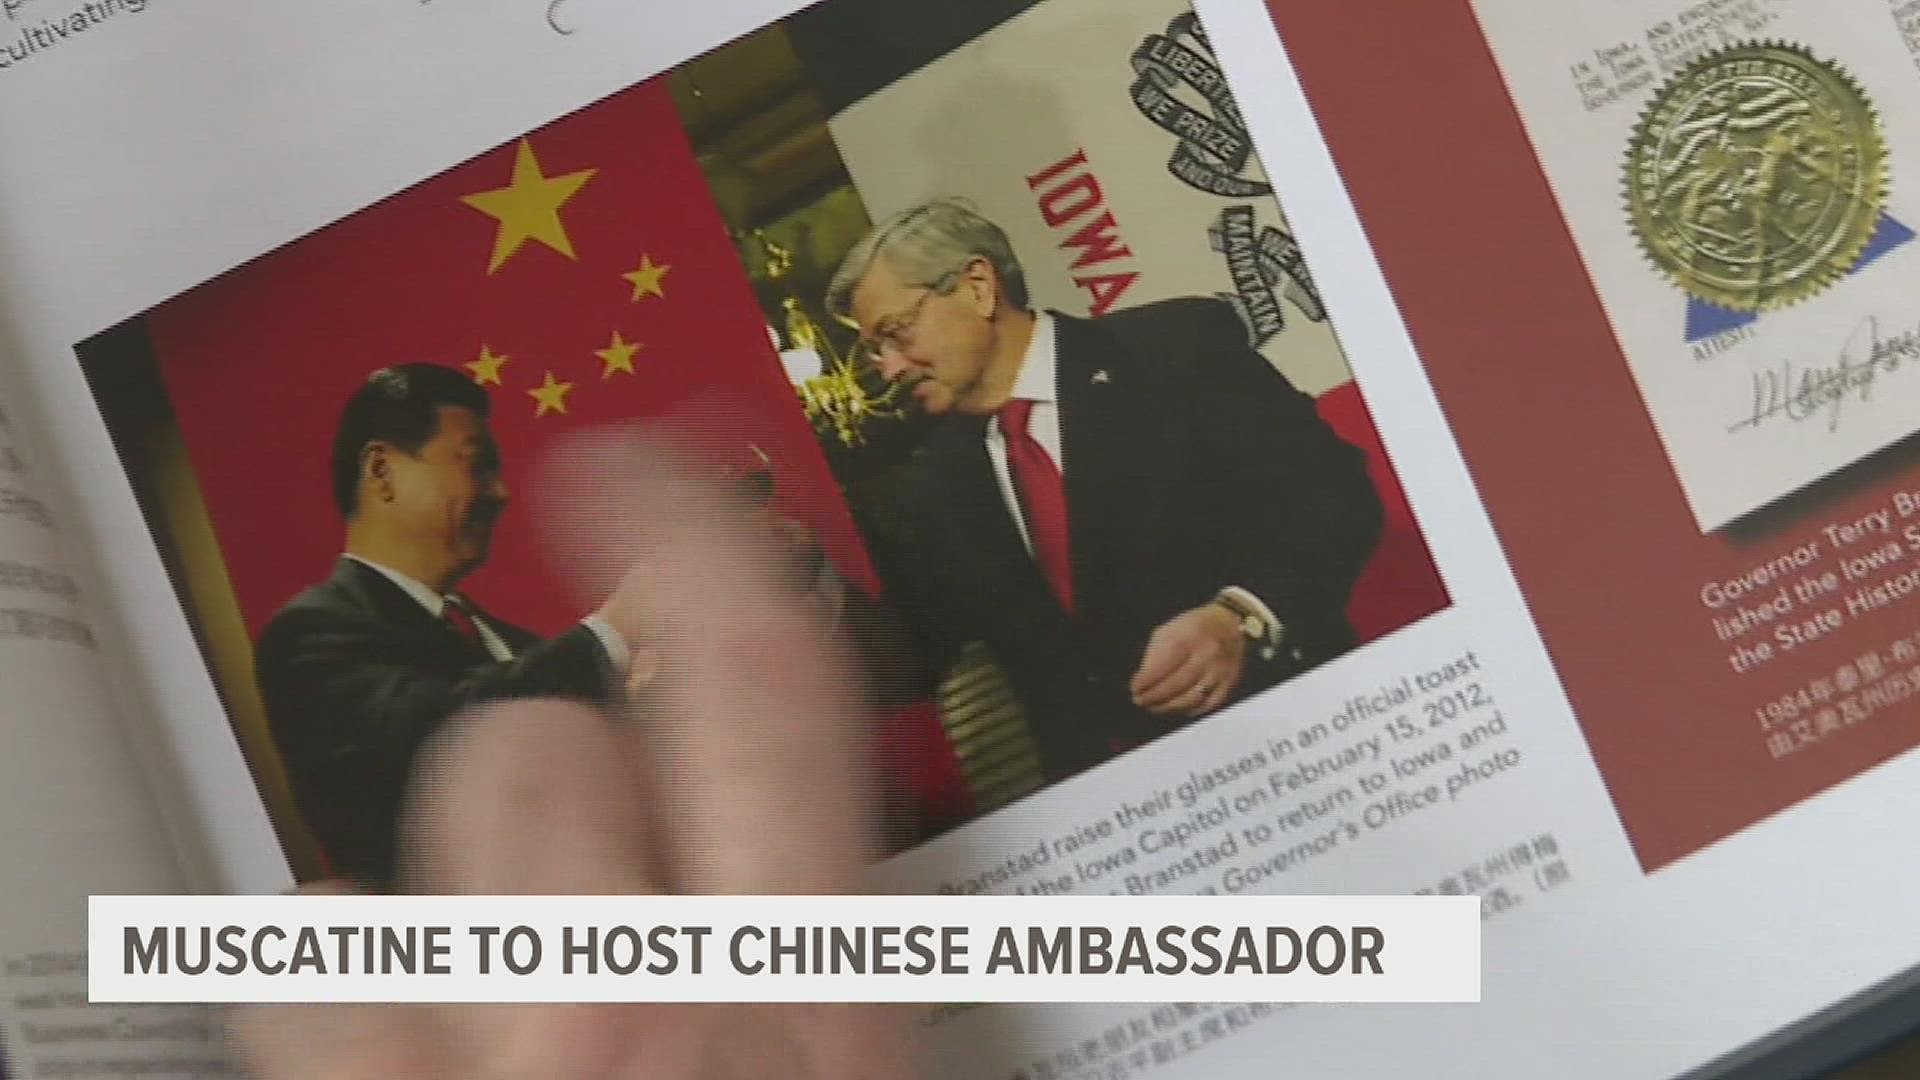 Ambassador Qin Gang will visit on April 20 with old friends of current Chinese President Xi Jinping.